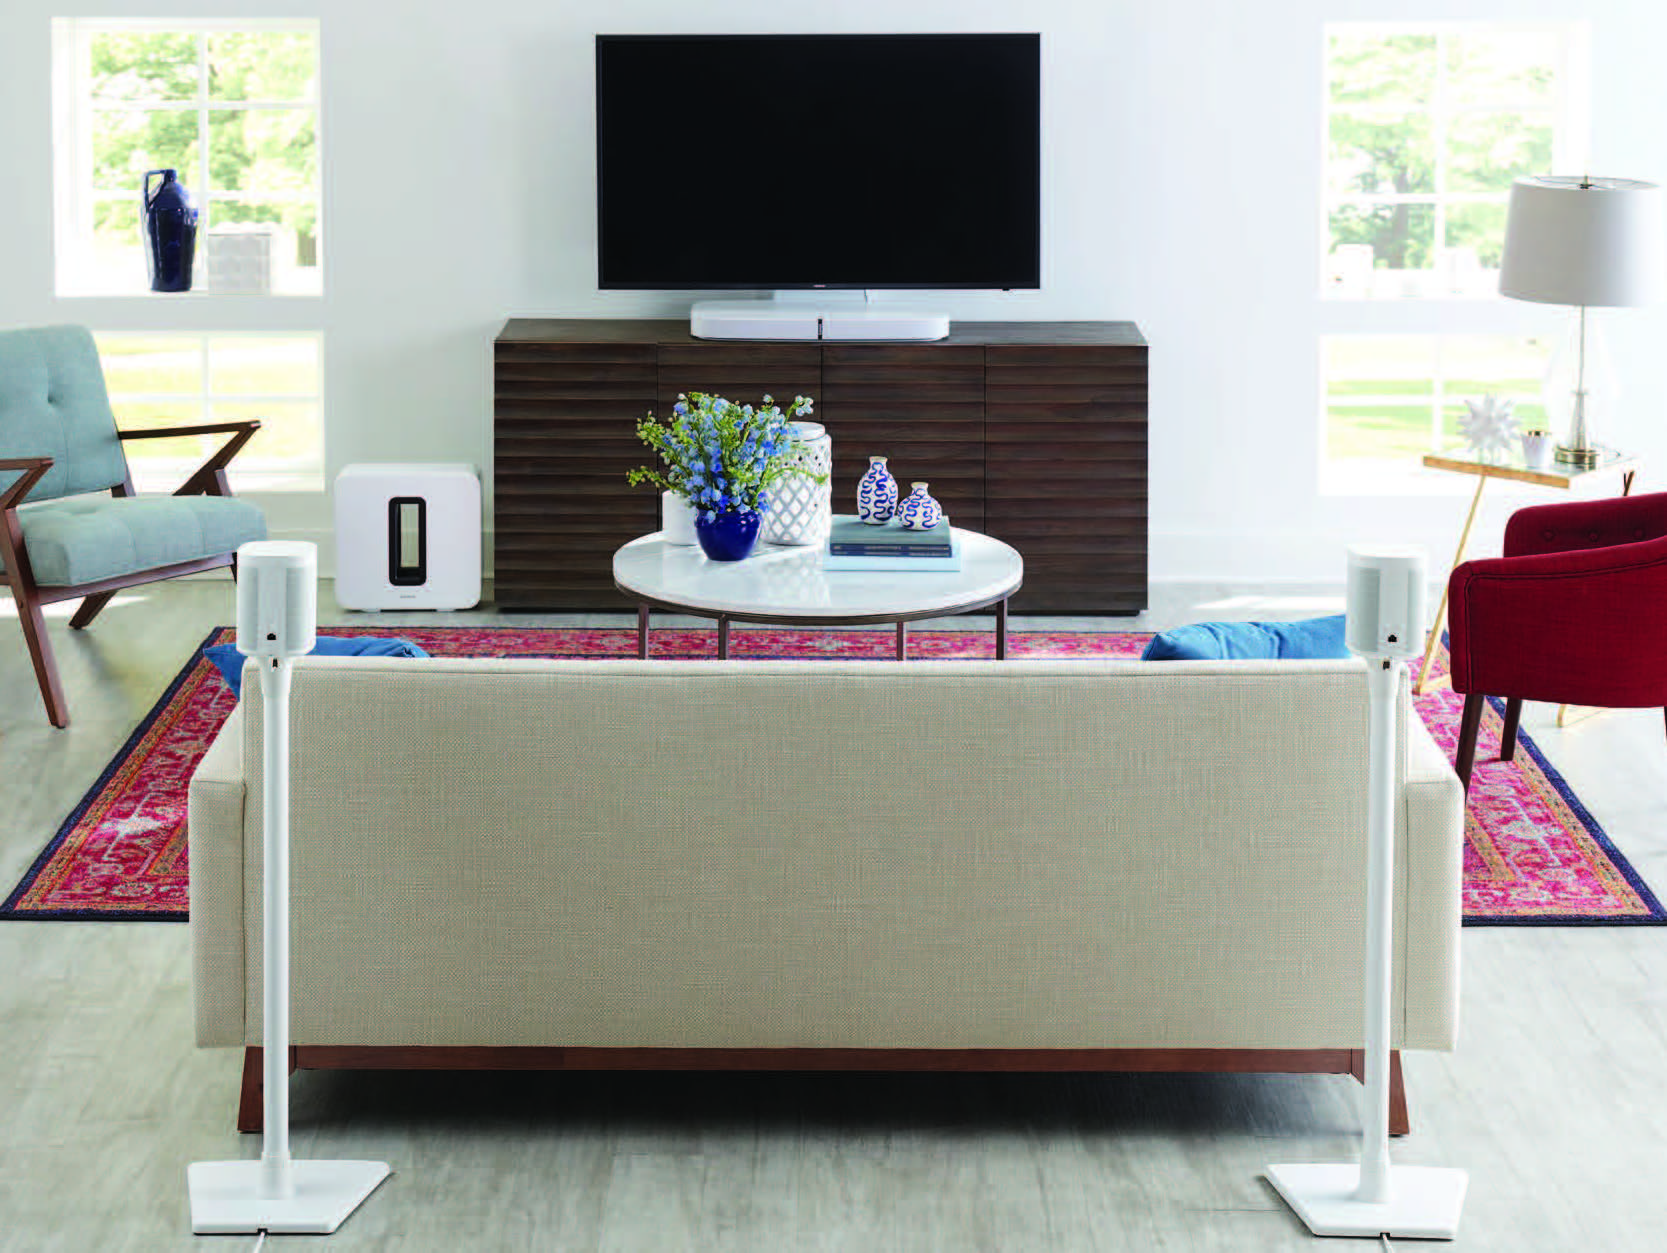 A lifestyle image of wireless speaker mounts, stands, and bases designed for Sonos® Home Sound System displayed in a living room